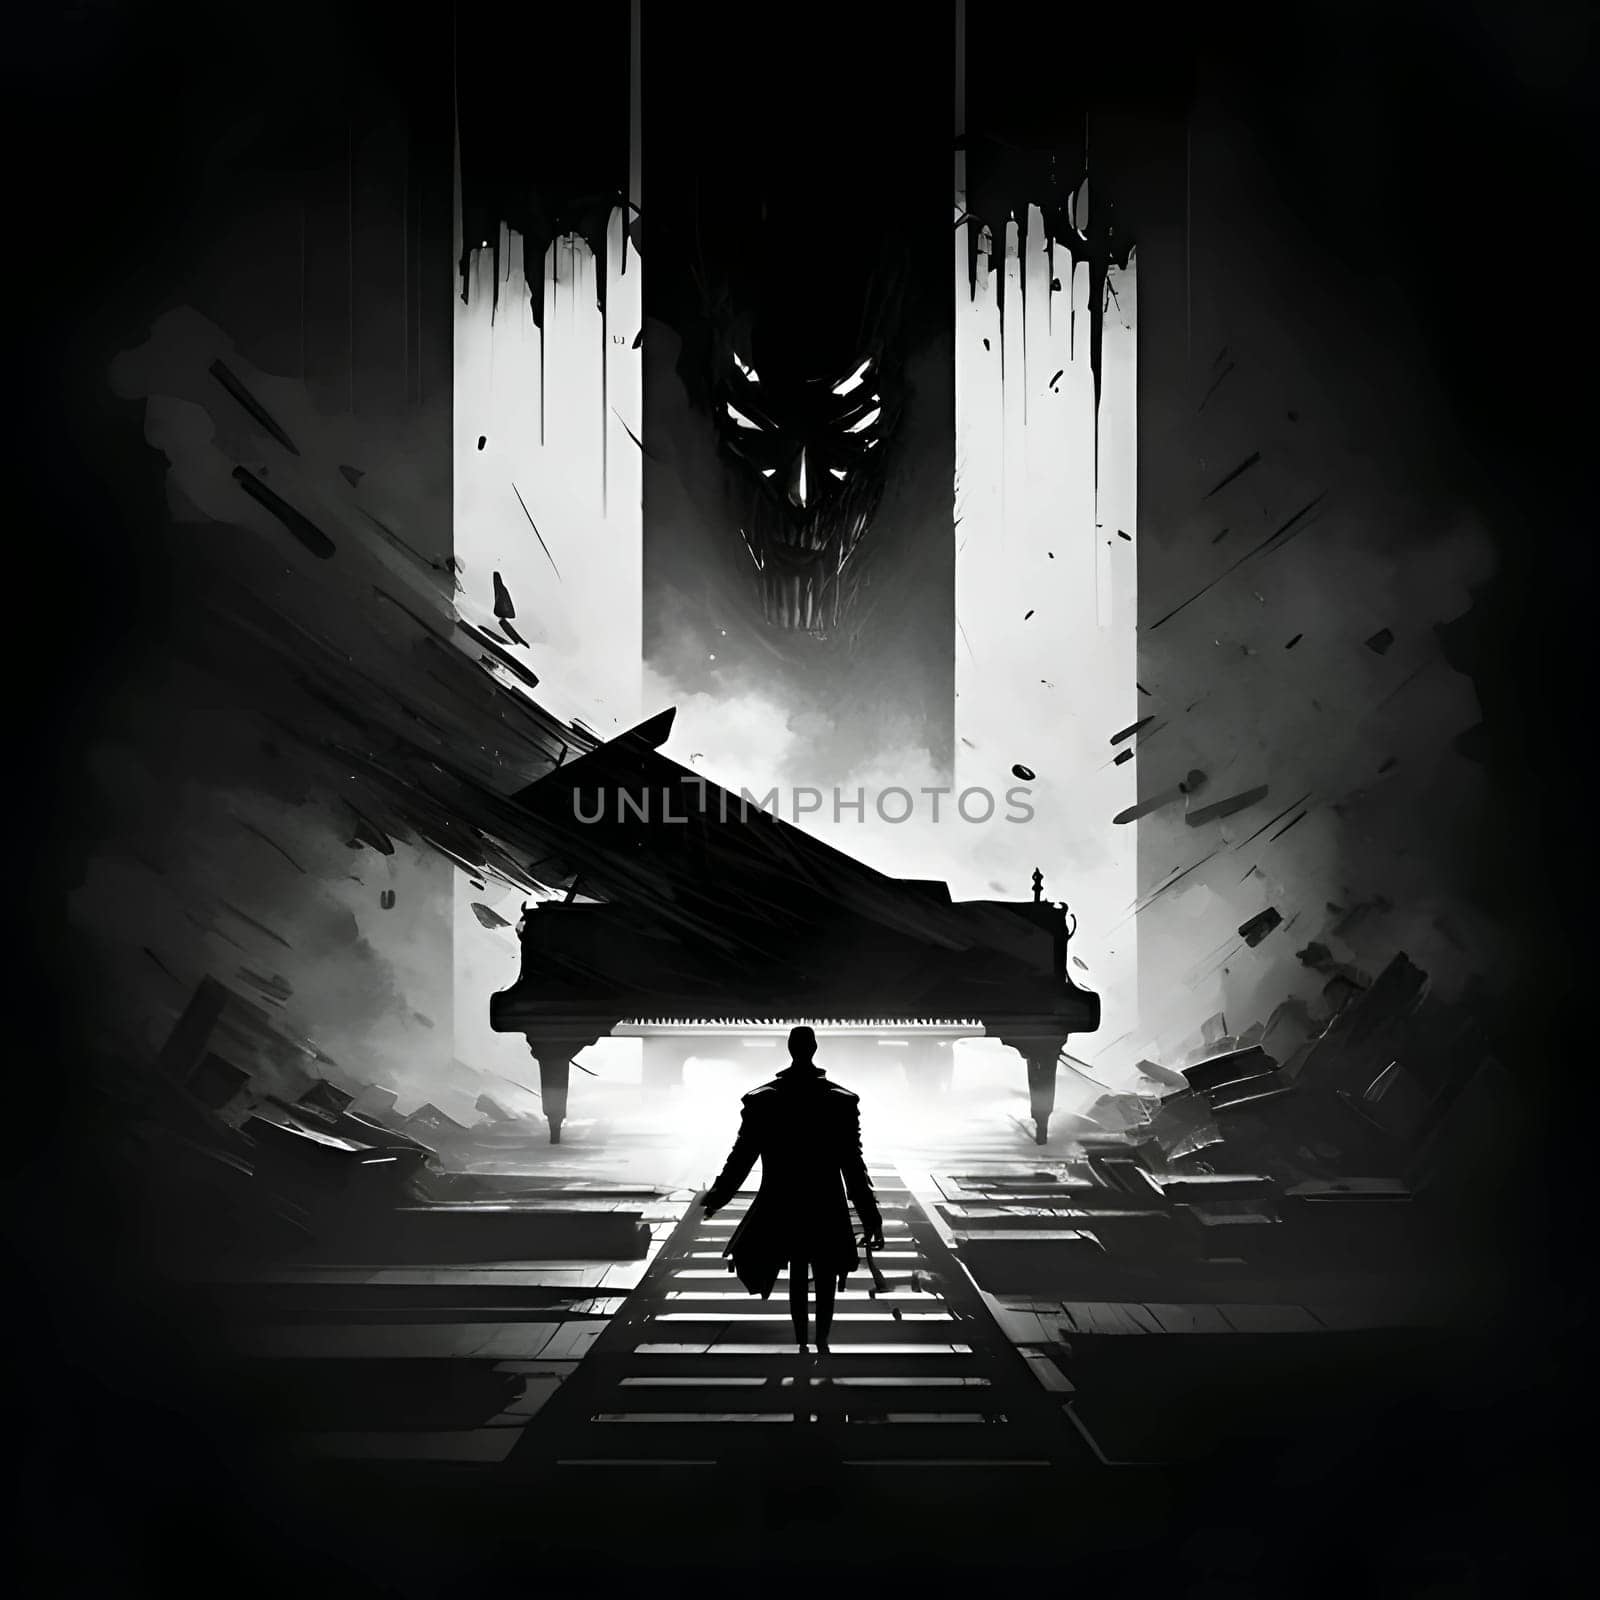 Vector illustration of a man and a piano in black silhouette against a clean gloomy background, capturing graceful forms.